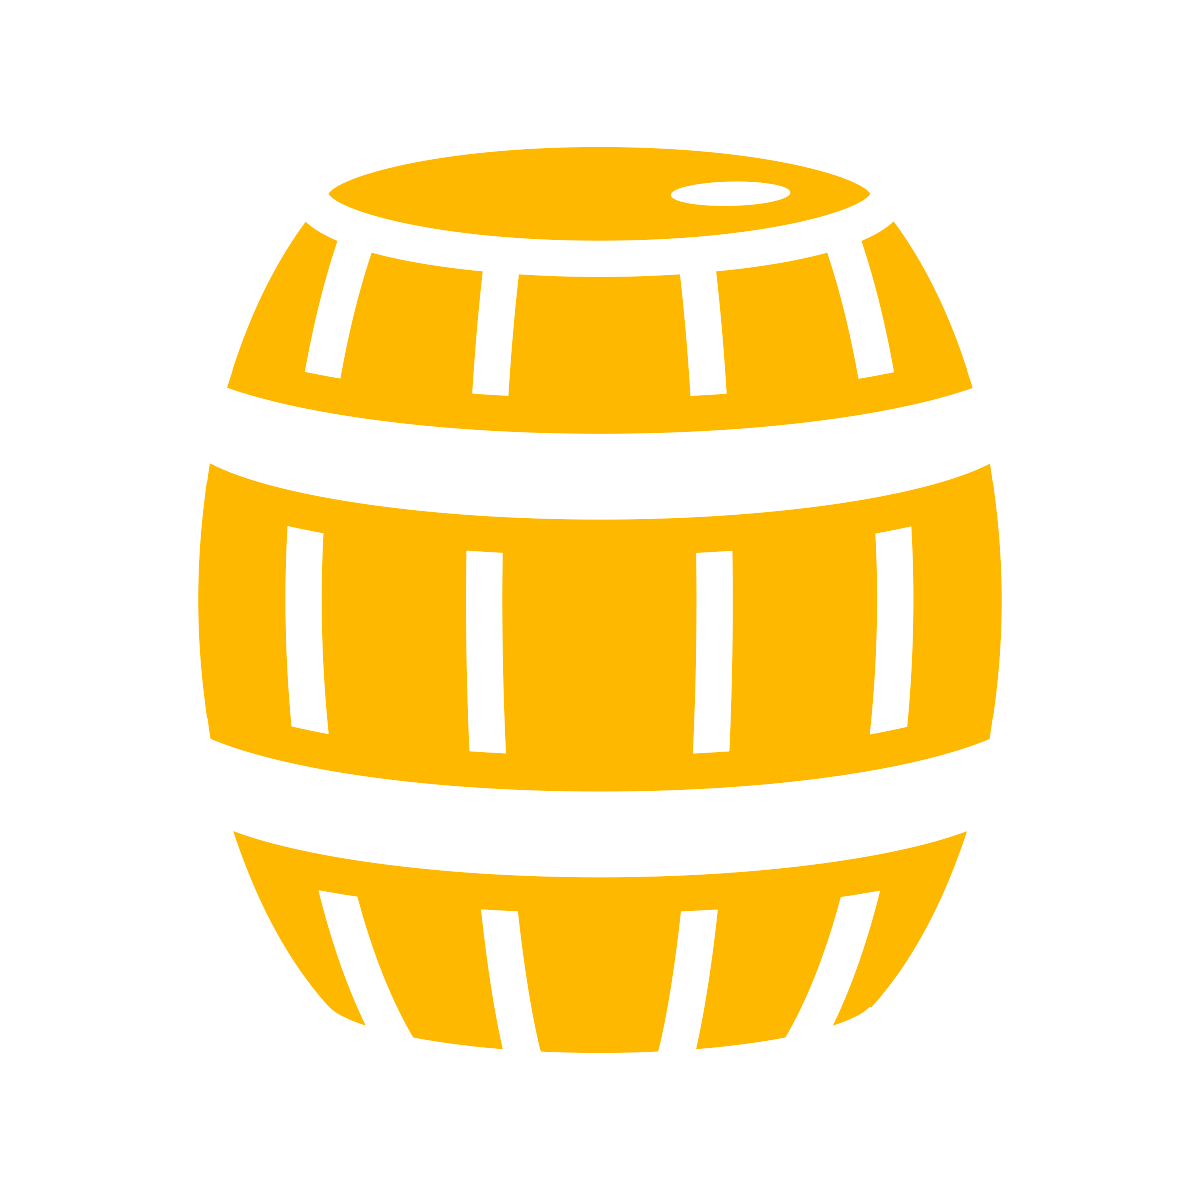 stylized graphic of a beer barrel